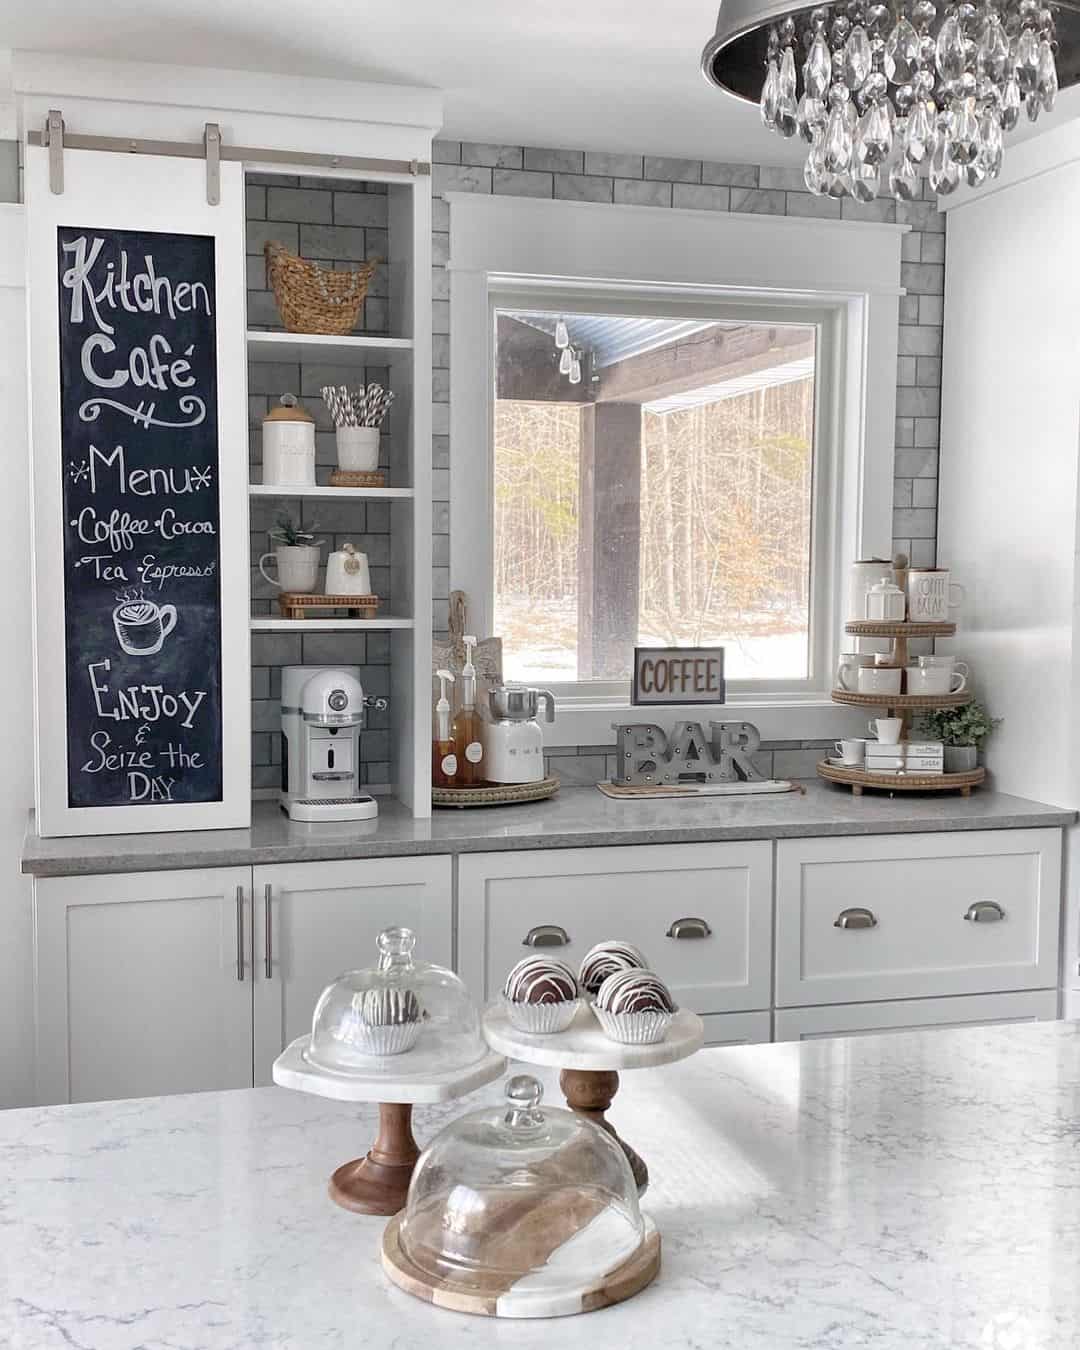 15 Built-In Coffee Bar Ideas for Your Own Private Café